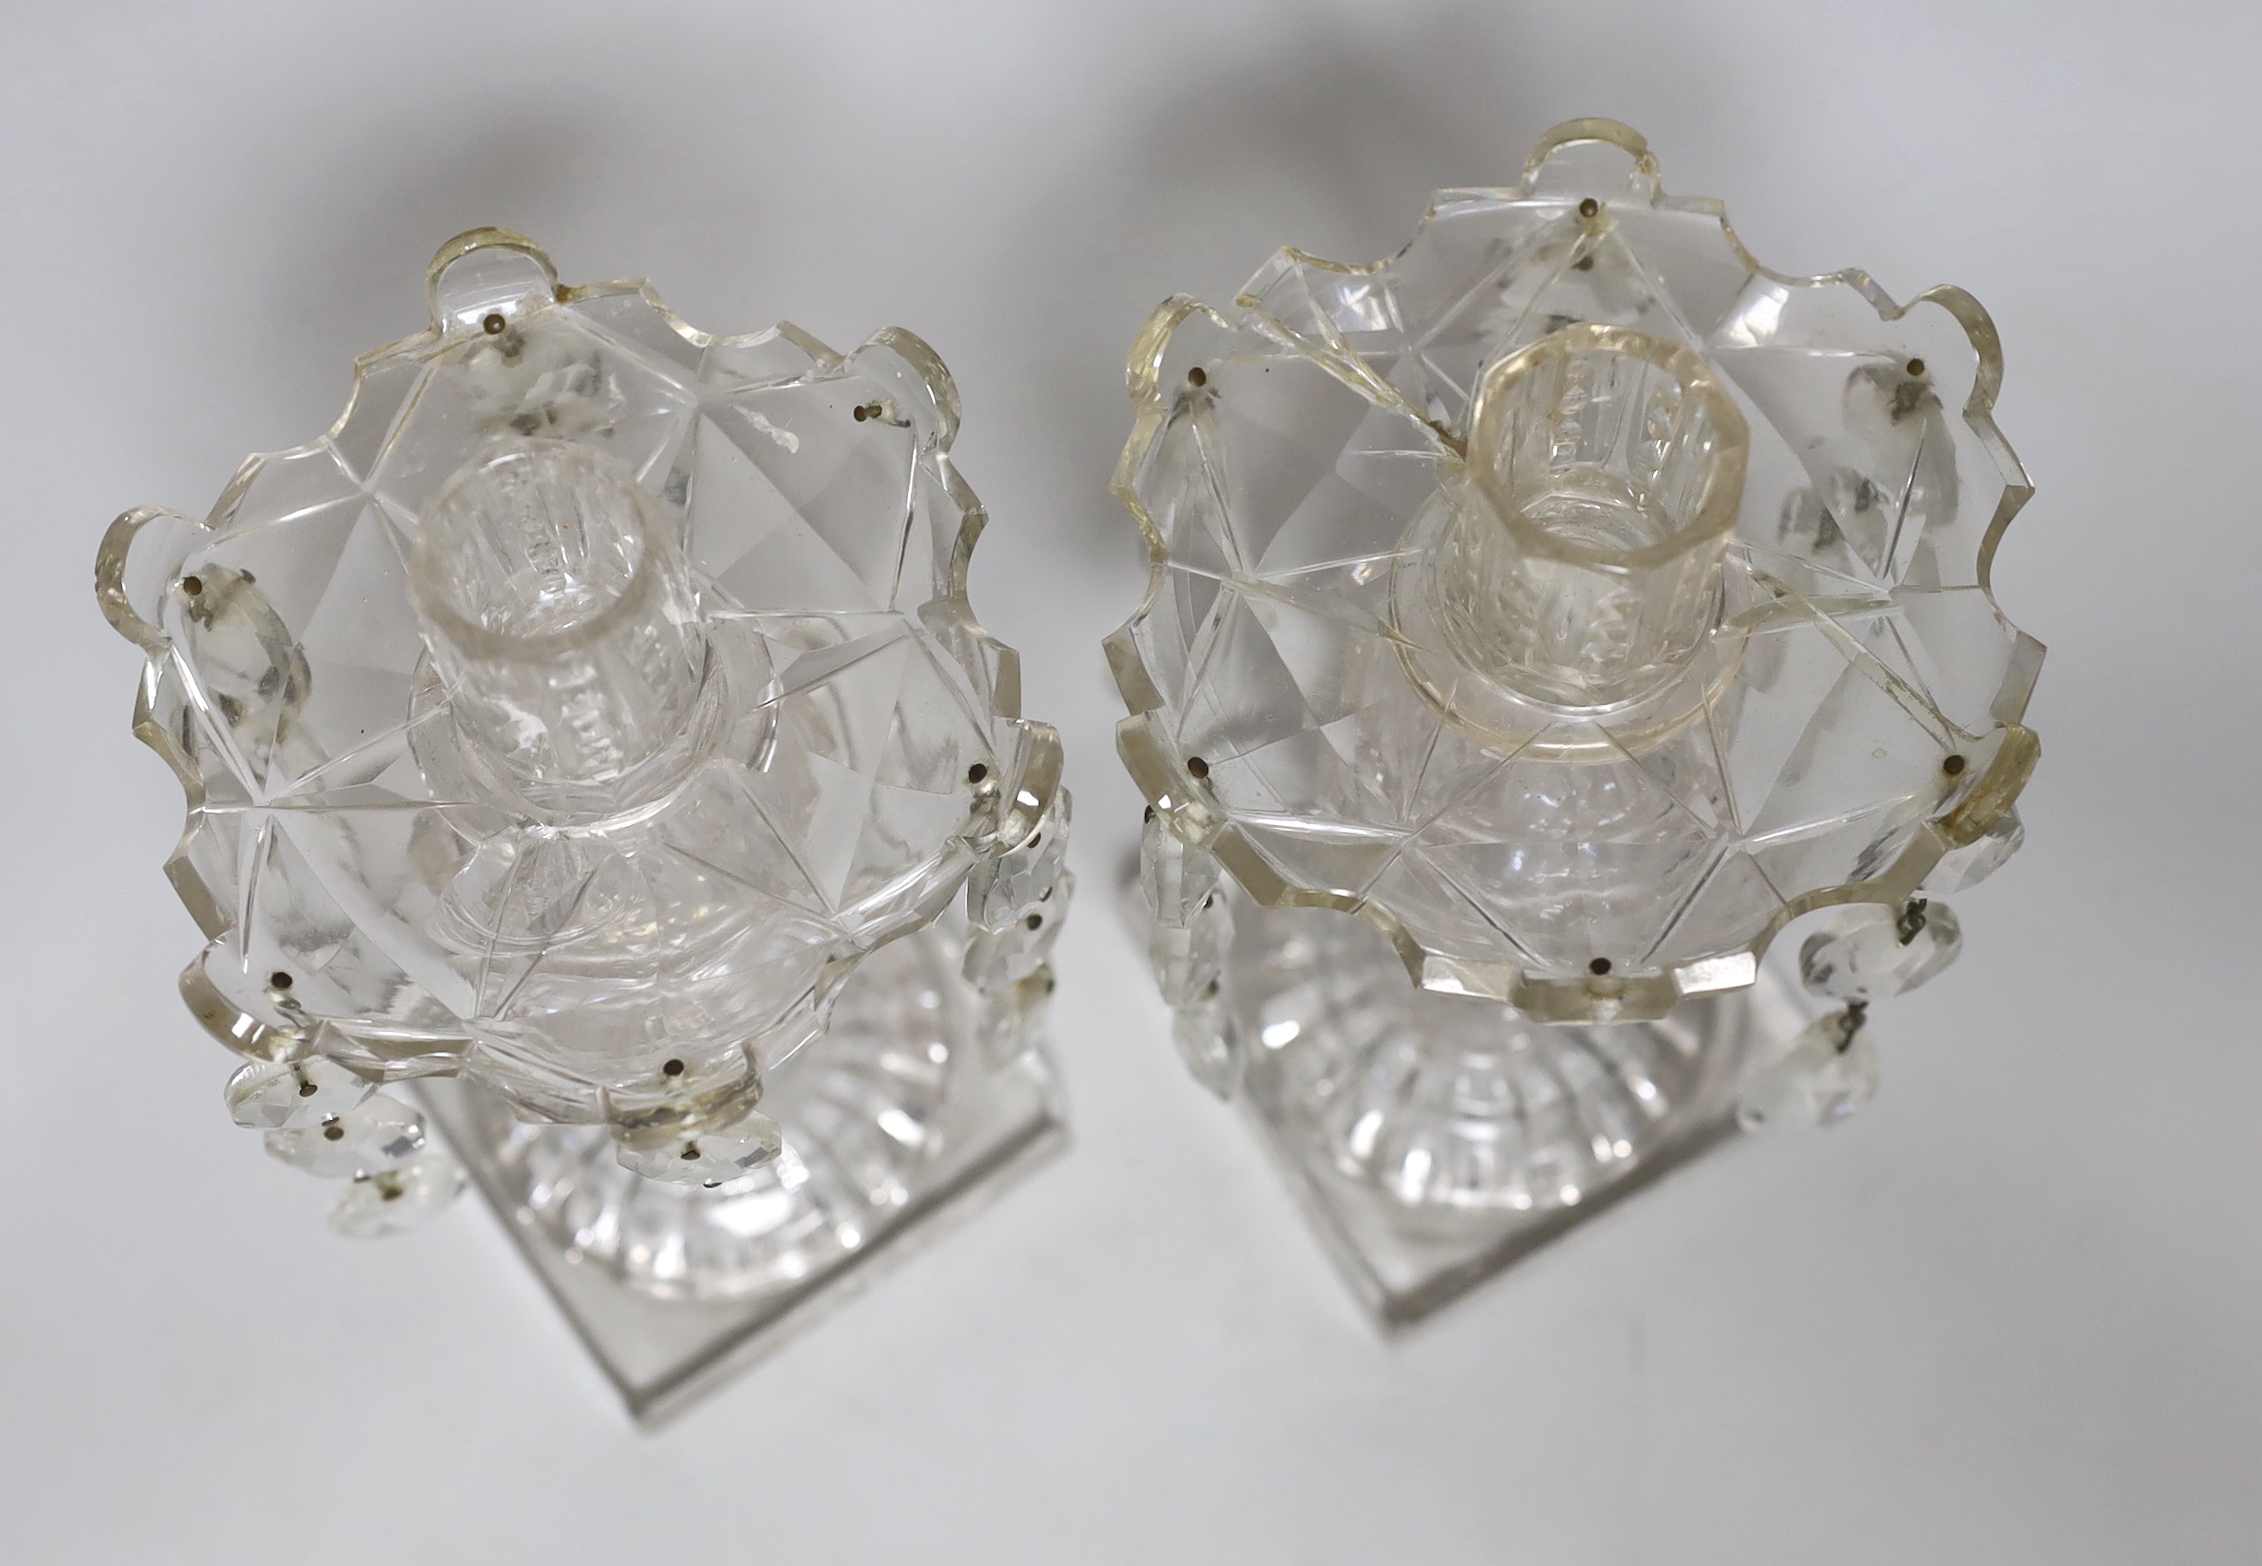 A pair of 19th century glass lustre candlesticks with drops, 22cm high